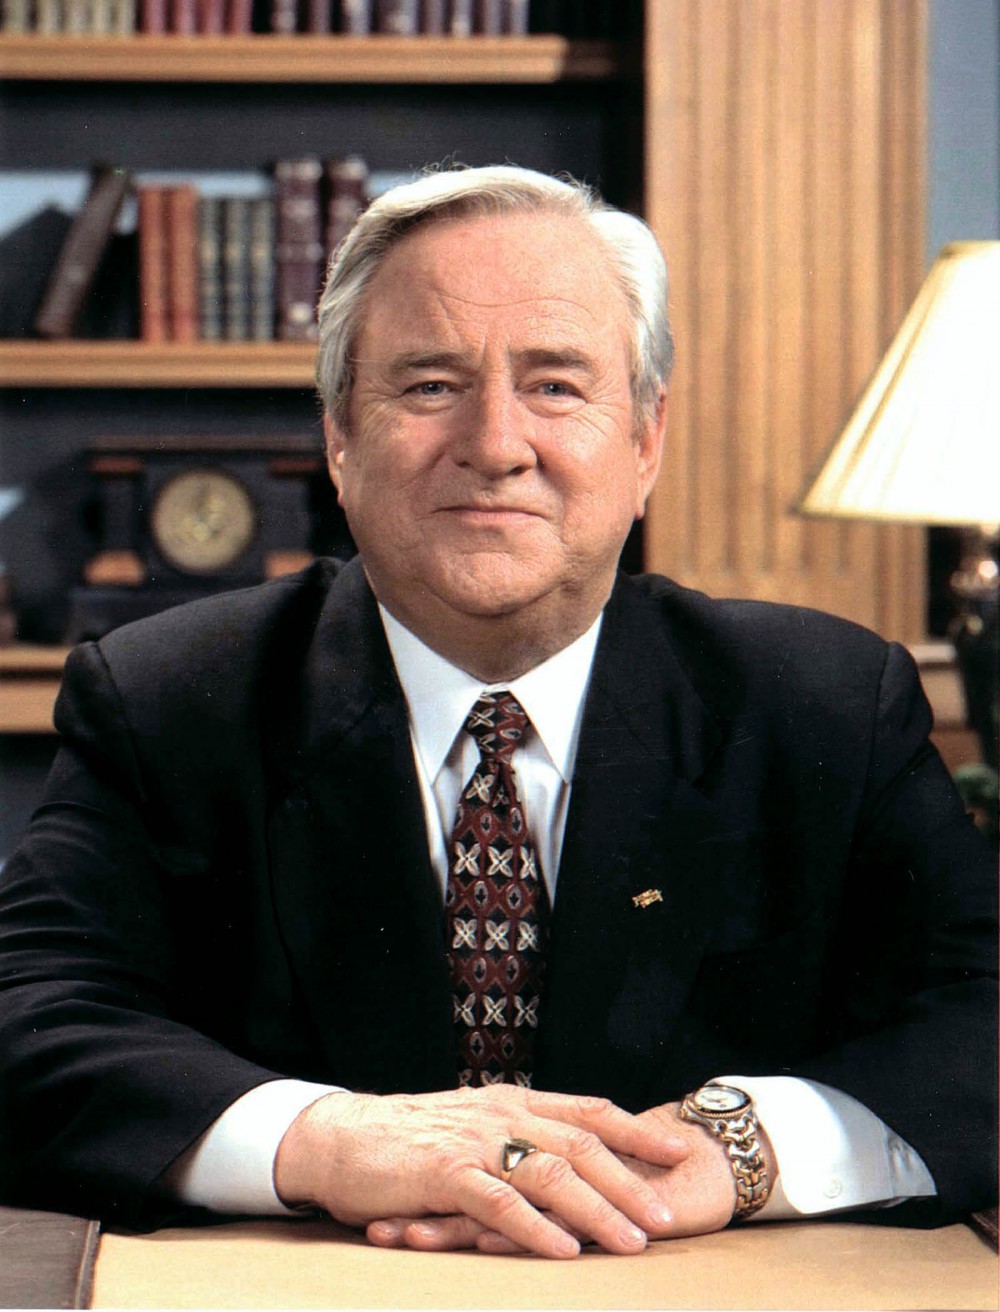 Jerry Falwell, the wildly popular TV evangelist, founded the Moral Majority political organization in the late 1970s. Decrying the demise of the nation’s morality, the organization gained a massive following, helping to cement the status of the New Christian Right in American politics. Photograph, date unknown. Wikimedia, http://commons.wikimedia.org/wiki/File:Jerry_Falwell_portrait.jpg. 